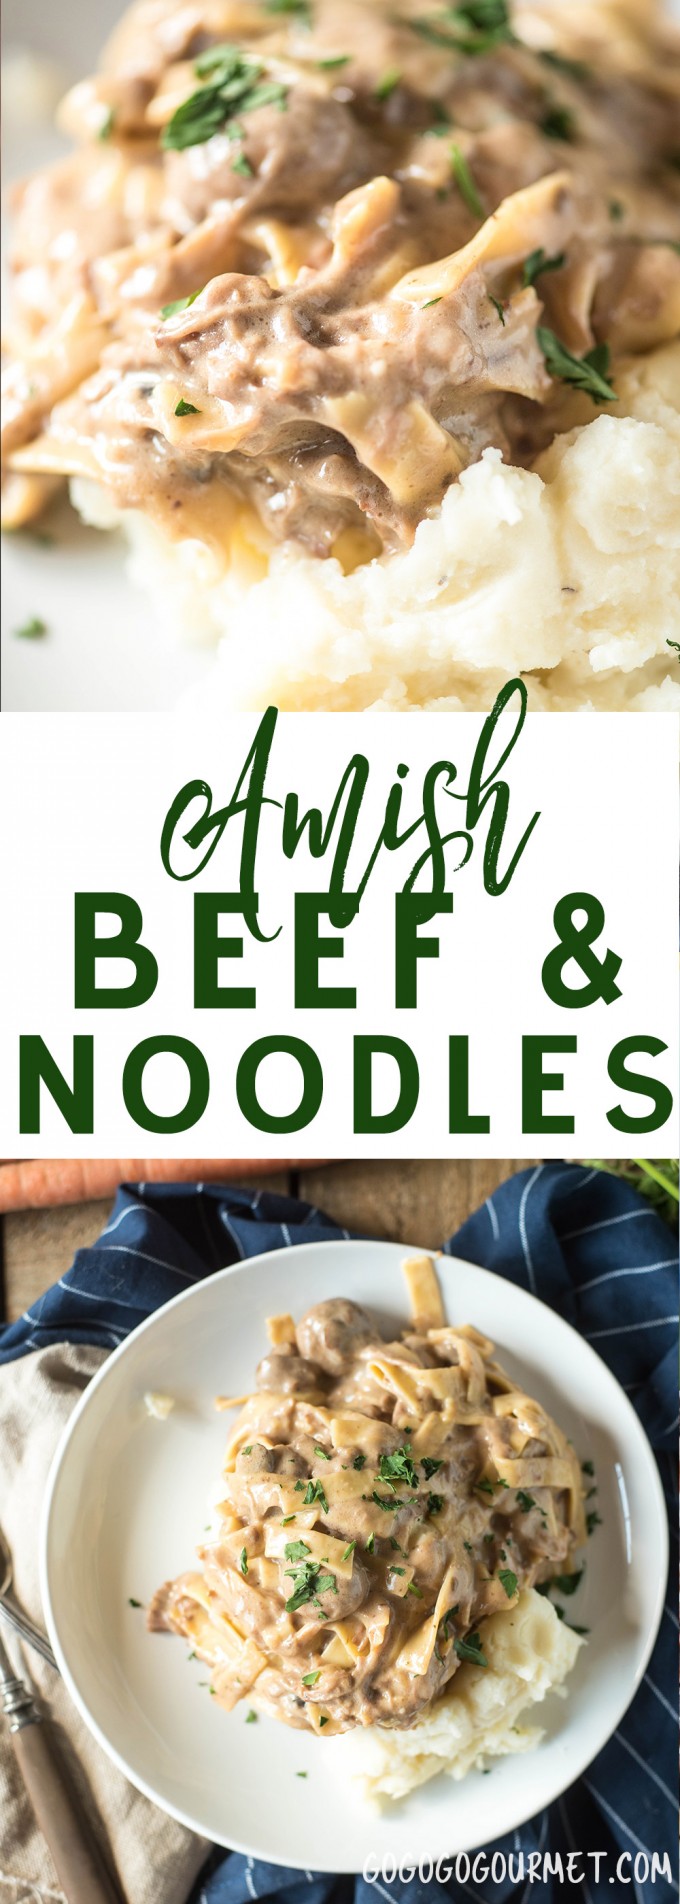 This Amish Beef and Noodles recipe can be made in a slow cooker or an Instant Pot. Served over mashed potatoes, it's an easy and loved dinner recipe! #instantpot #slowcooker #beef #easydinner via @gogogogourmet